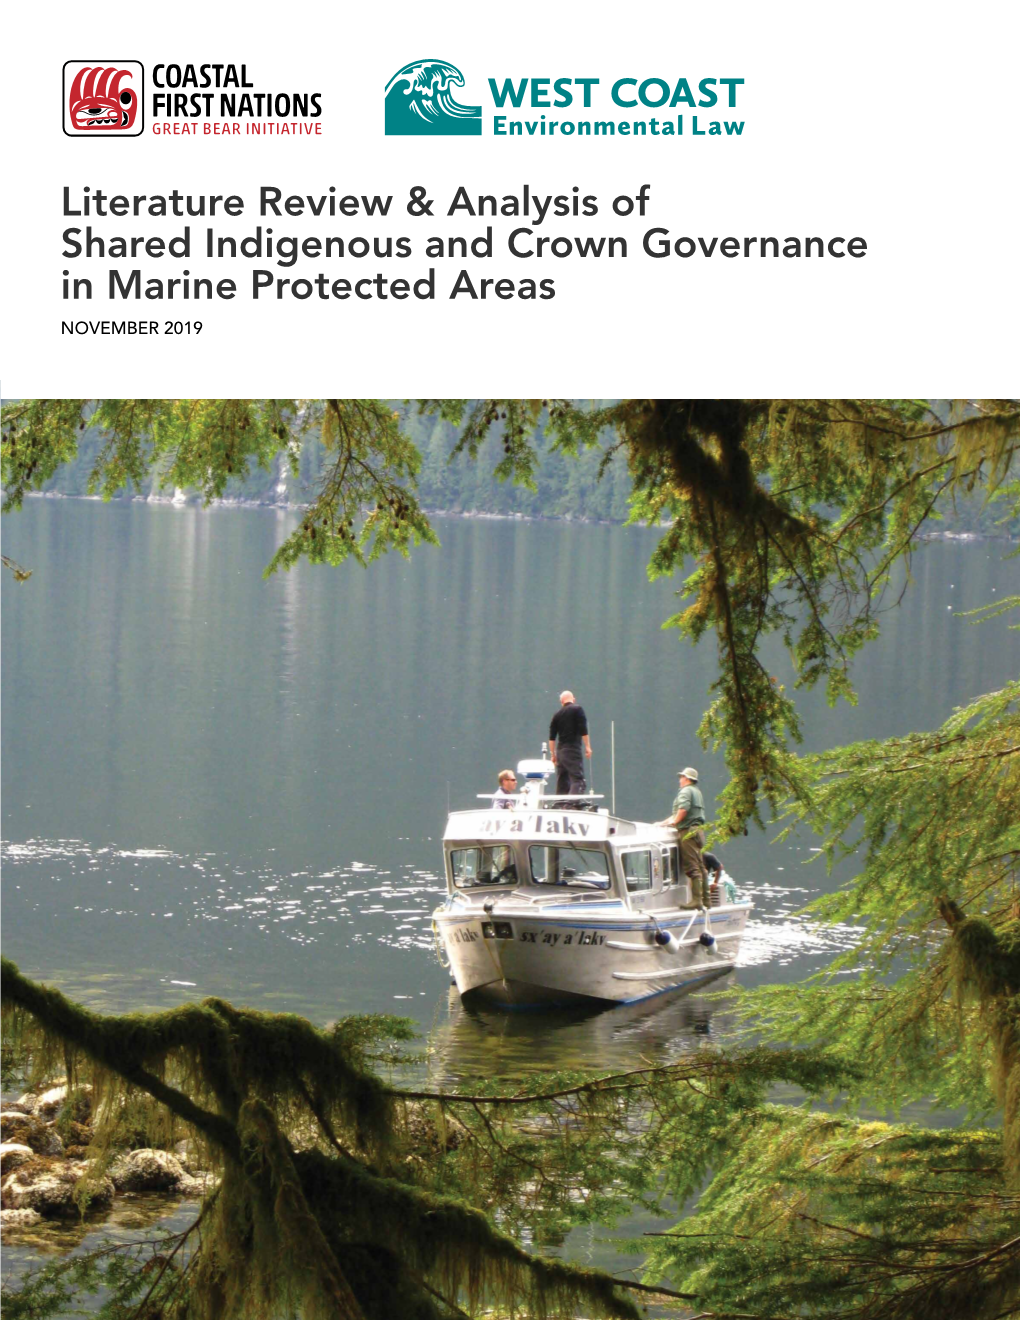 Literature Review & Analysis of Shared Indigenous and Crown